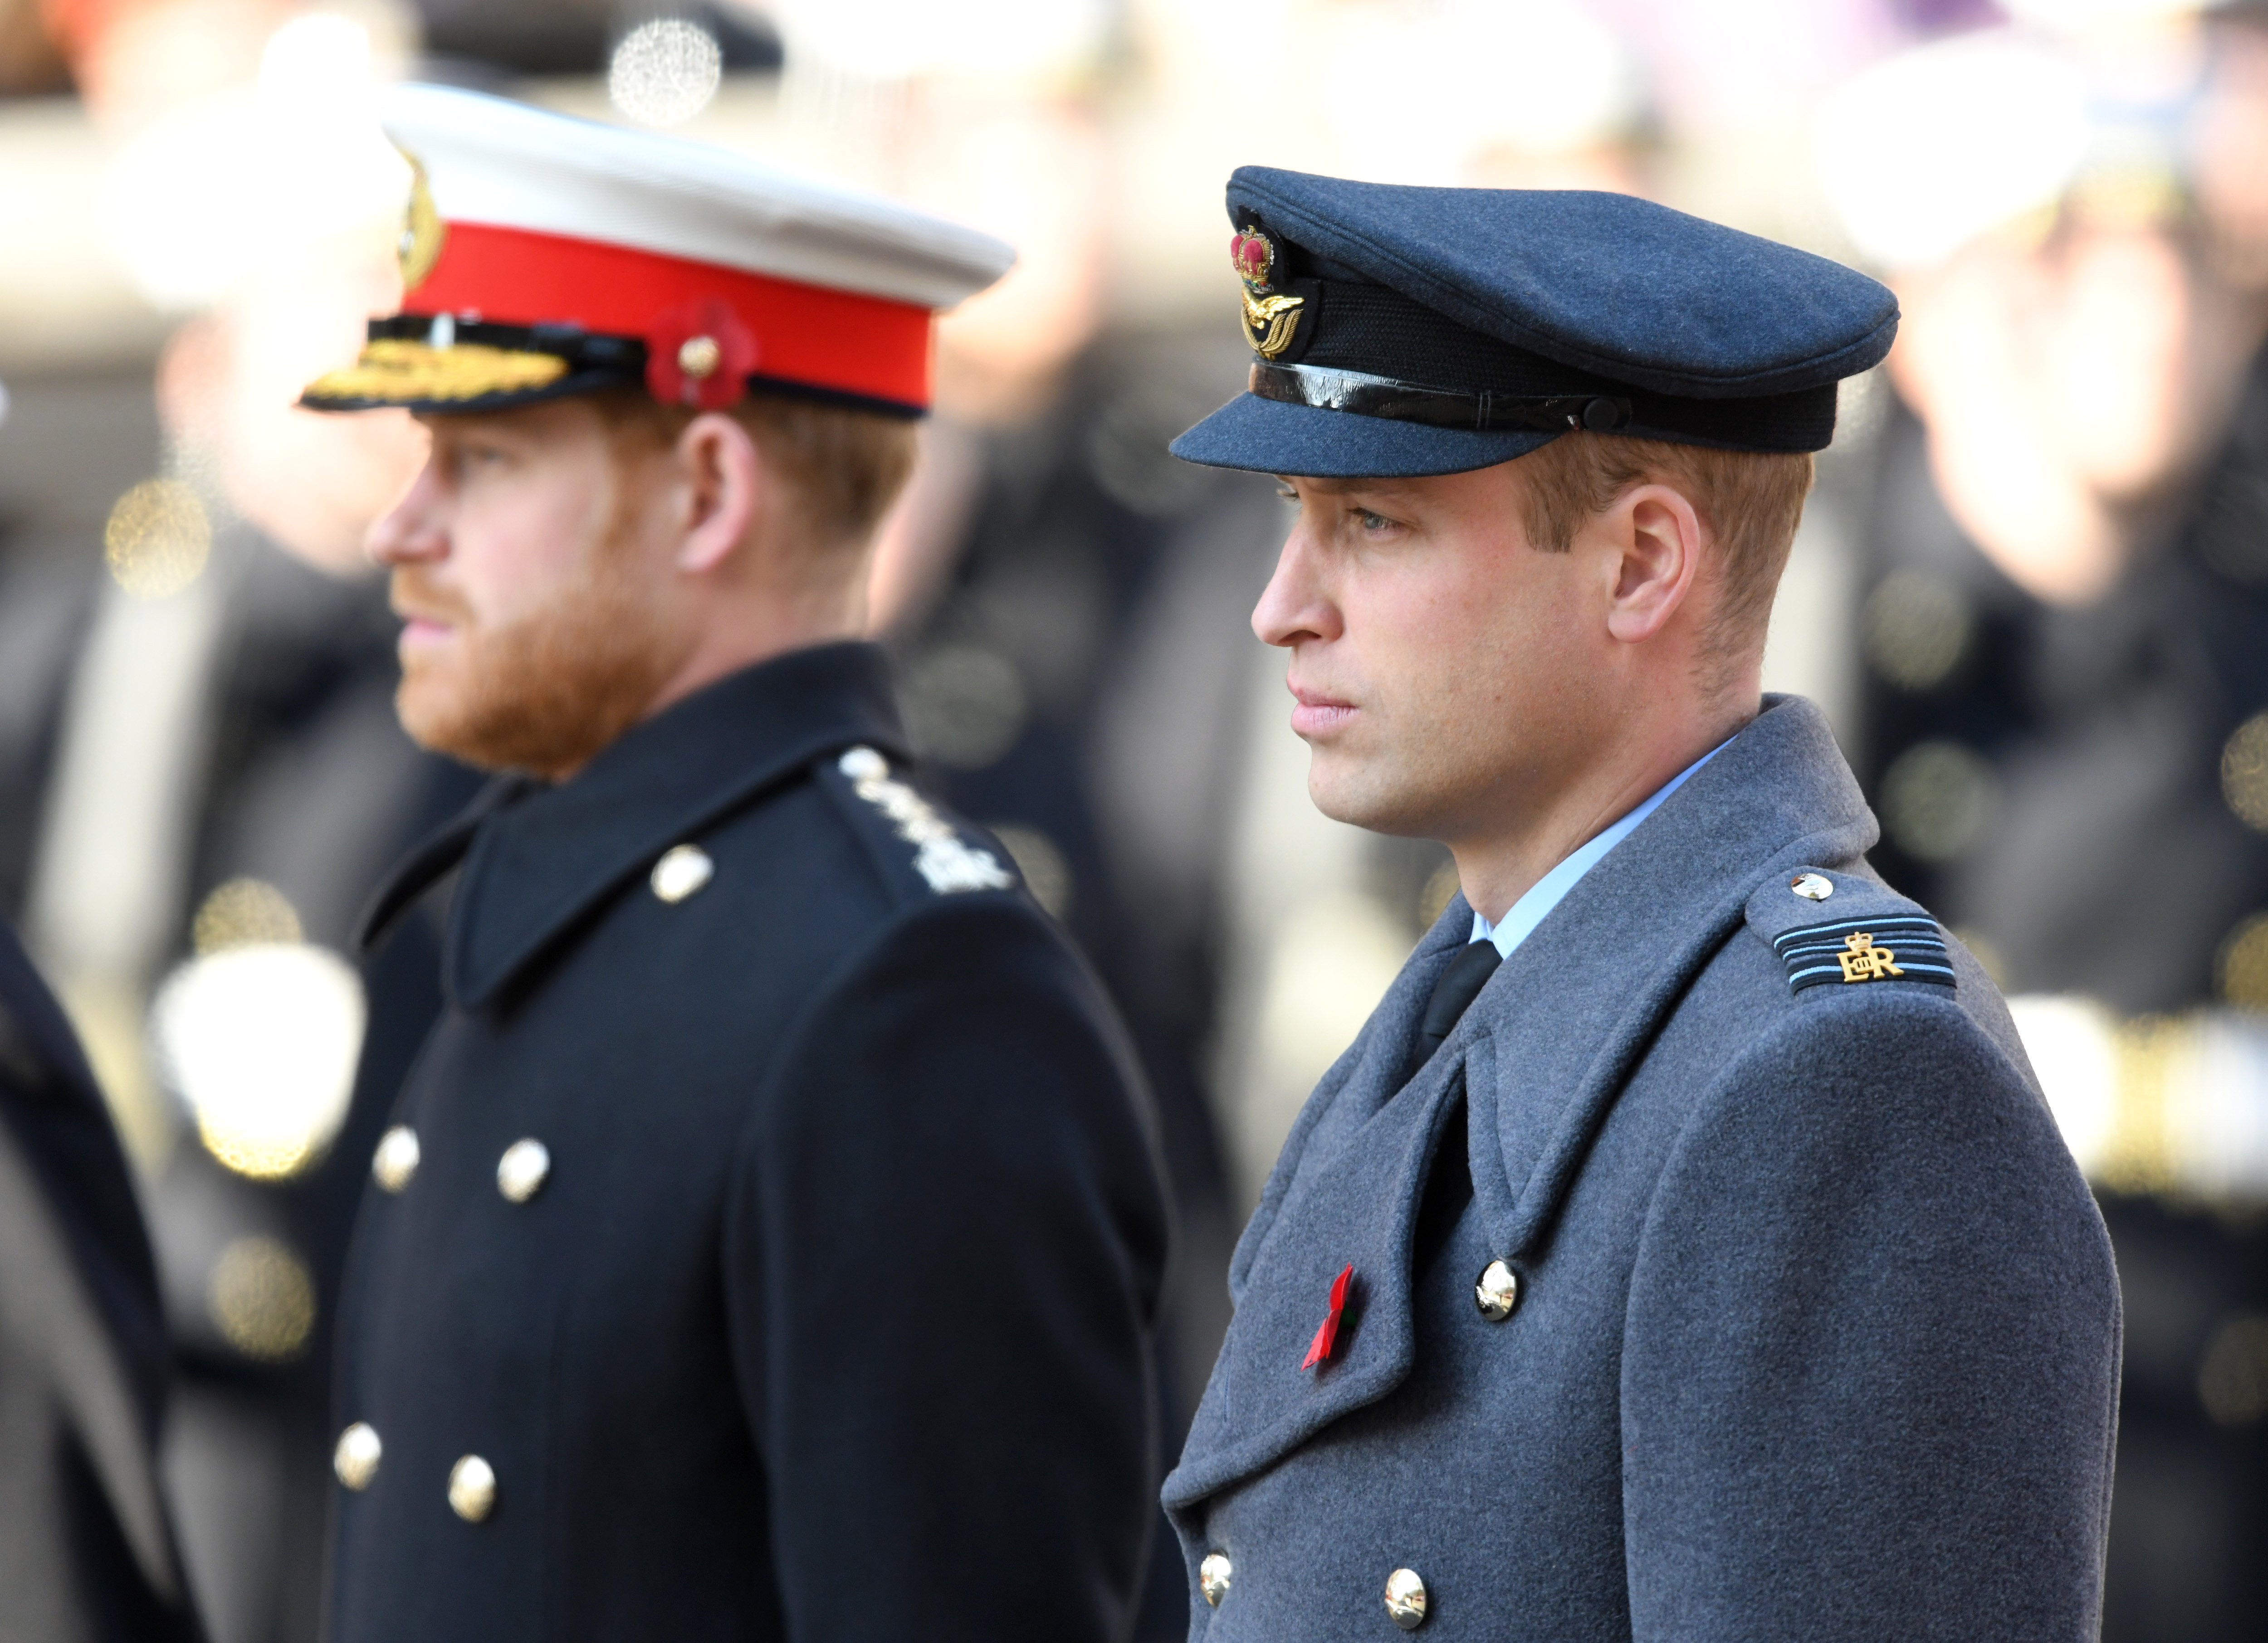 Prince Harry and Prince William attending the annual Remembrance Sunday memorial at The Cenotaph on November 10, 2019 in London, England. / Source: Getty Images